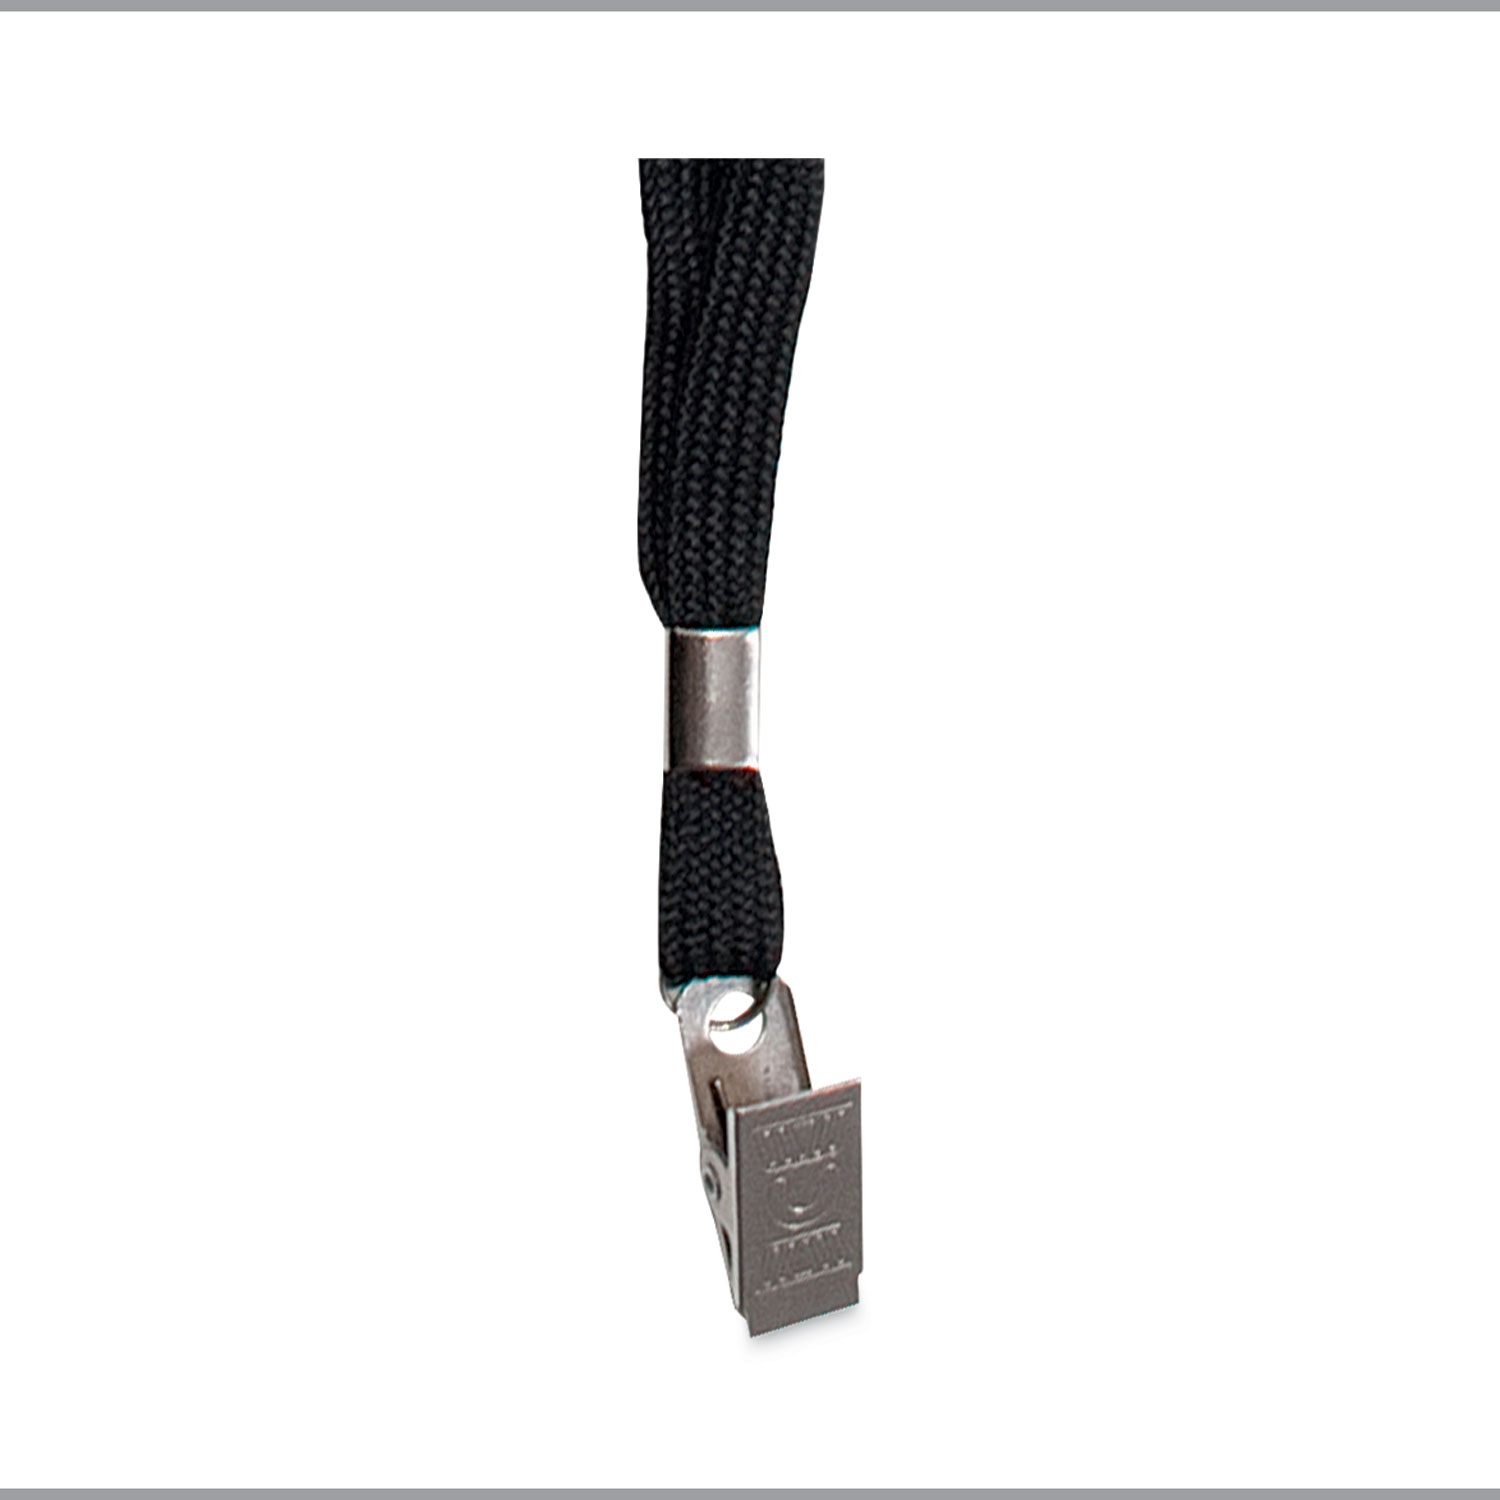 Lanyard Clips Designed for Safety and Durability –